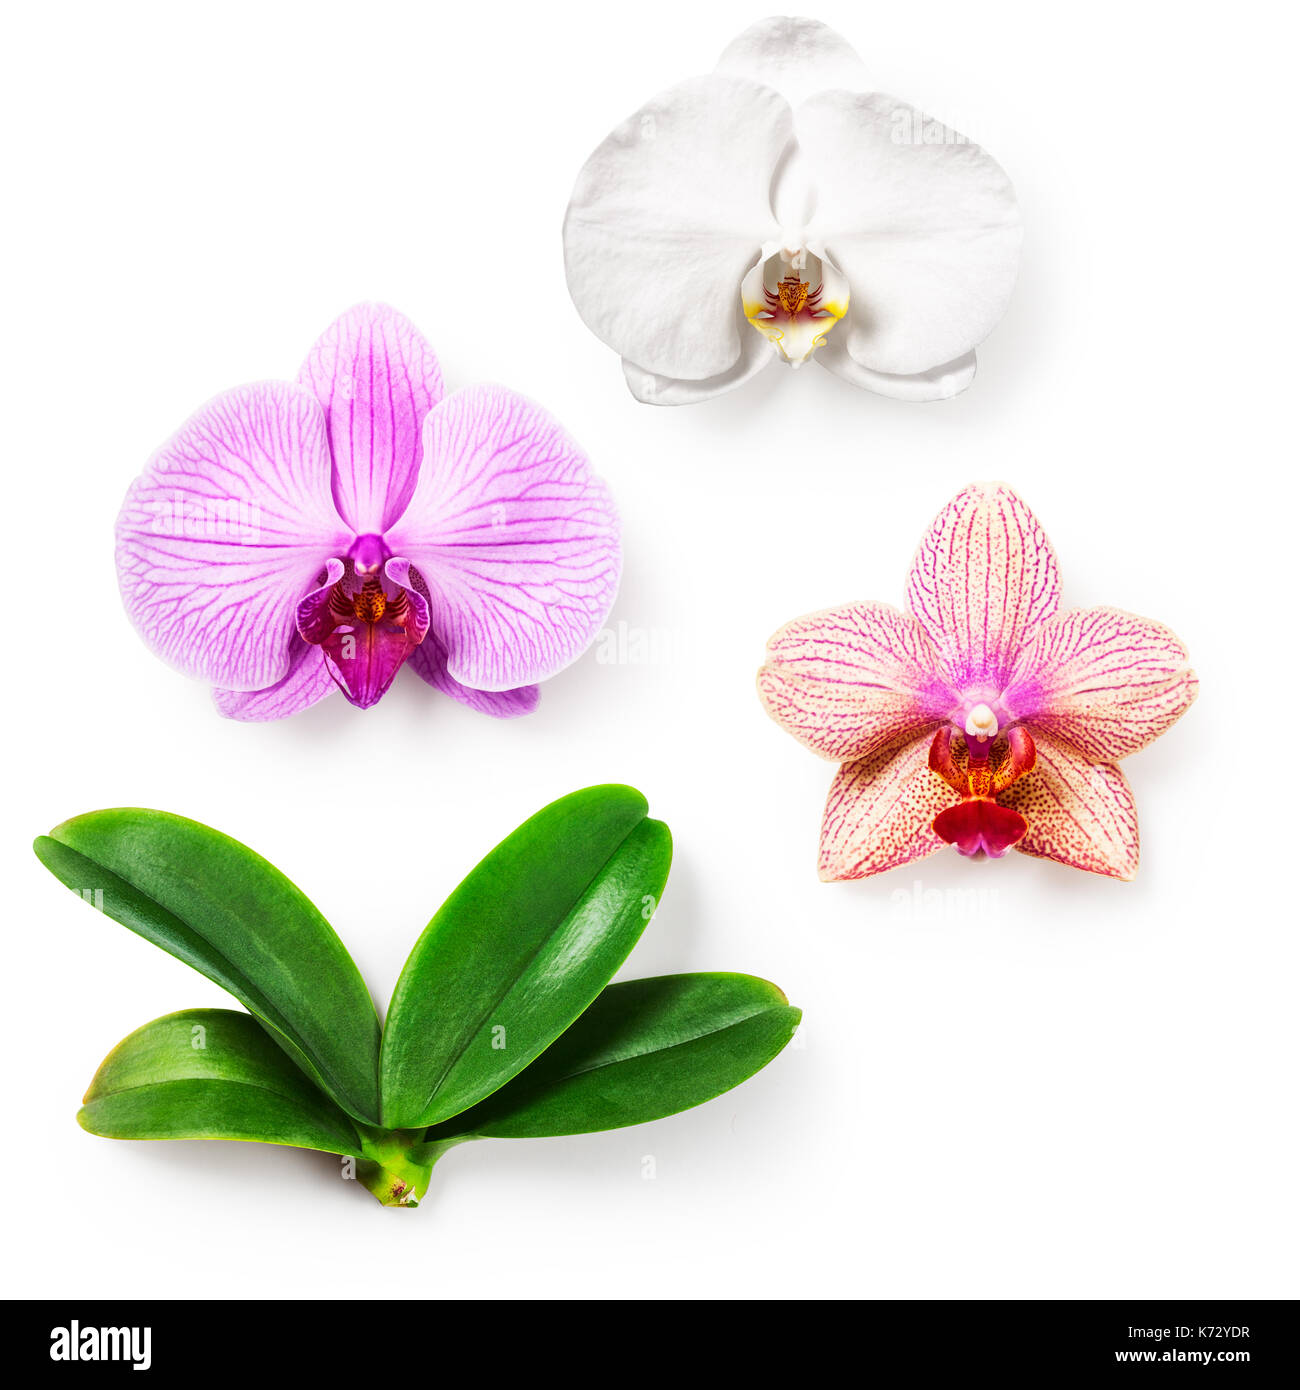 Orchid flower collection Cut Out Stock Images & Pictures - Page 3 - Alamy